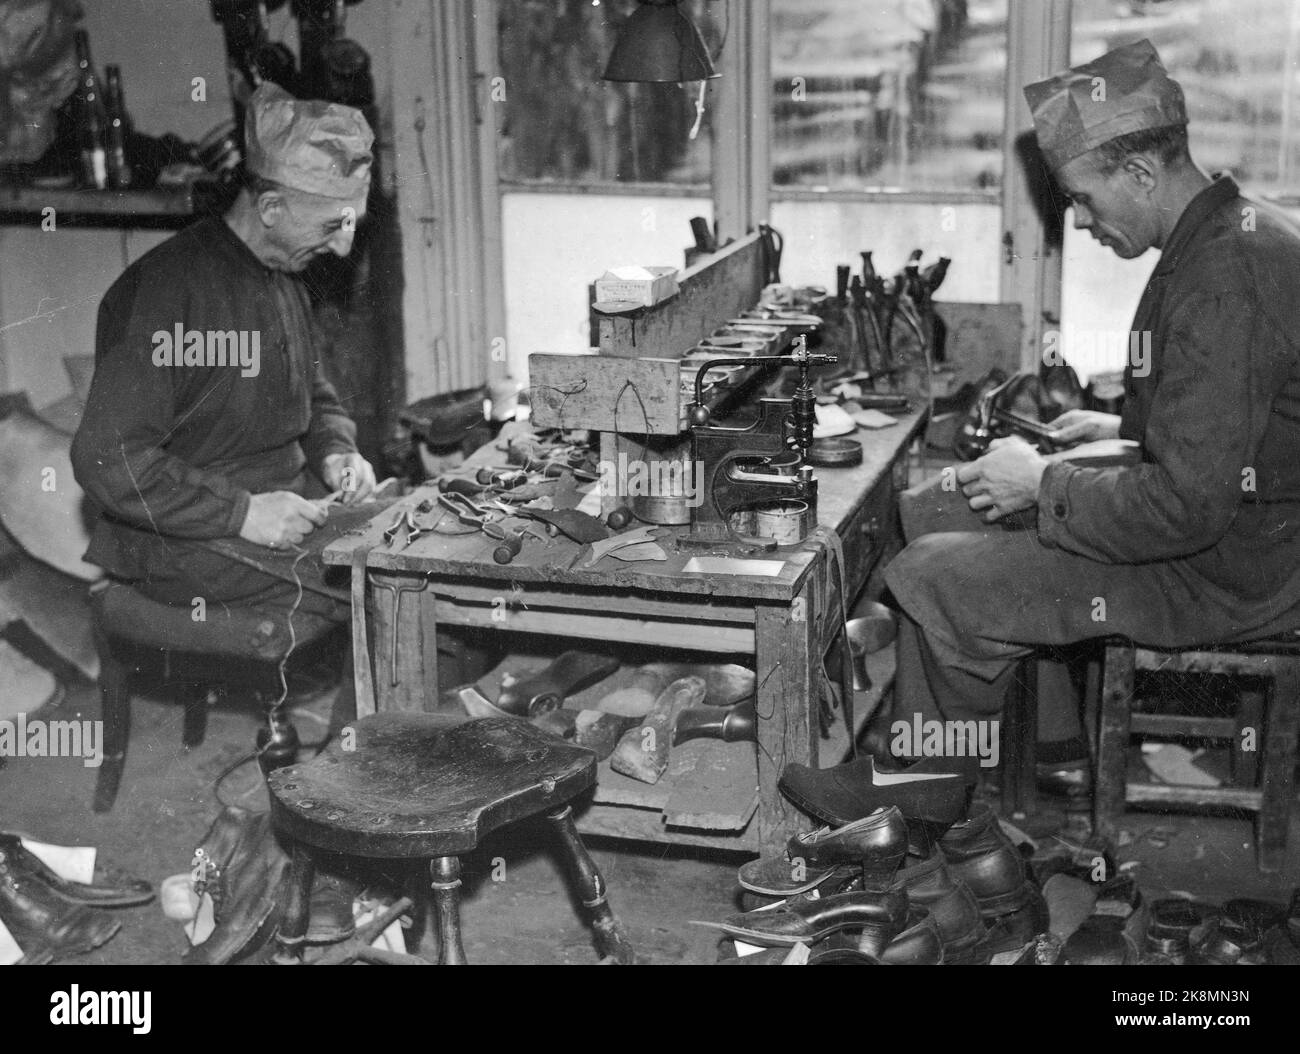 Oslo 19421221. Two men work on a scorering company. They repair shoes. Photo; Ntb Stock Photo